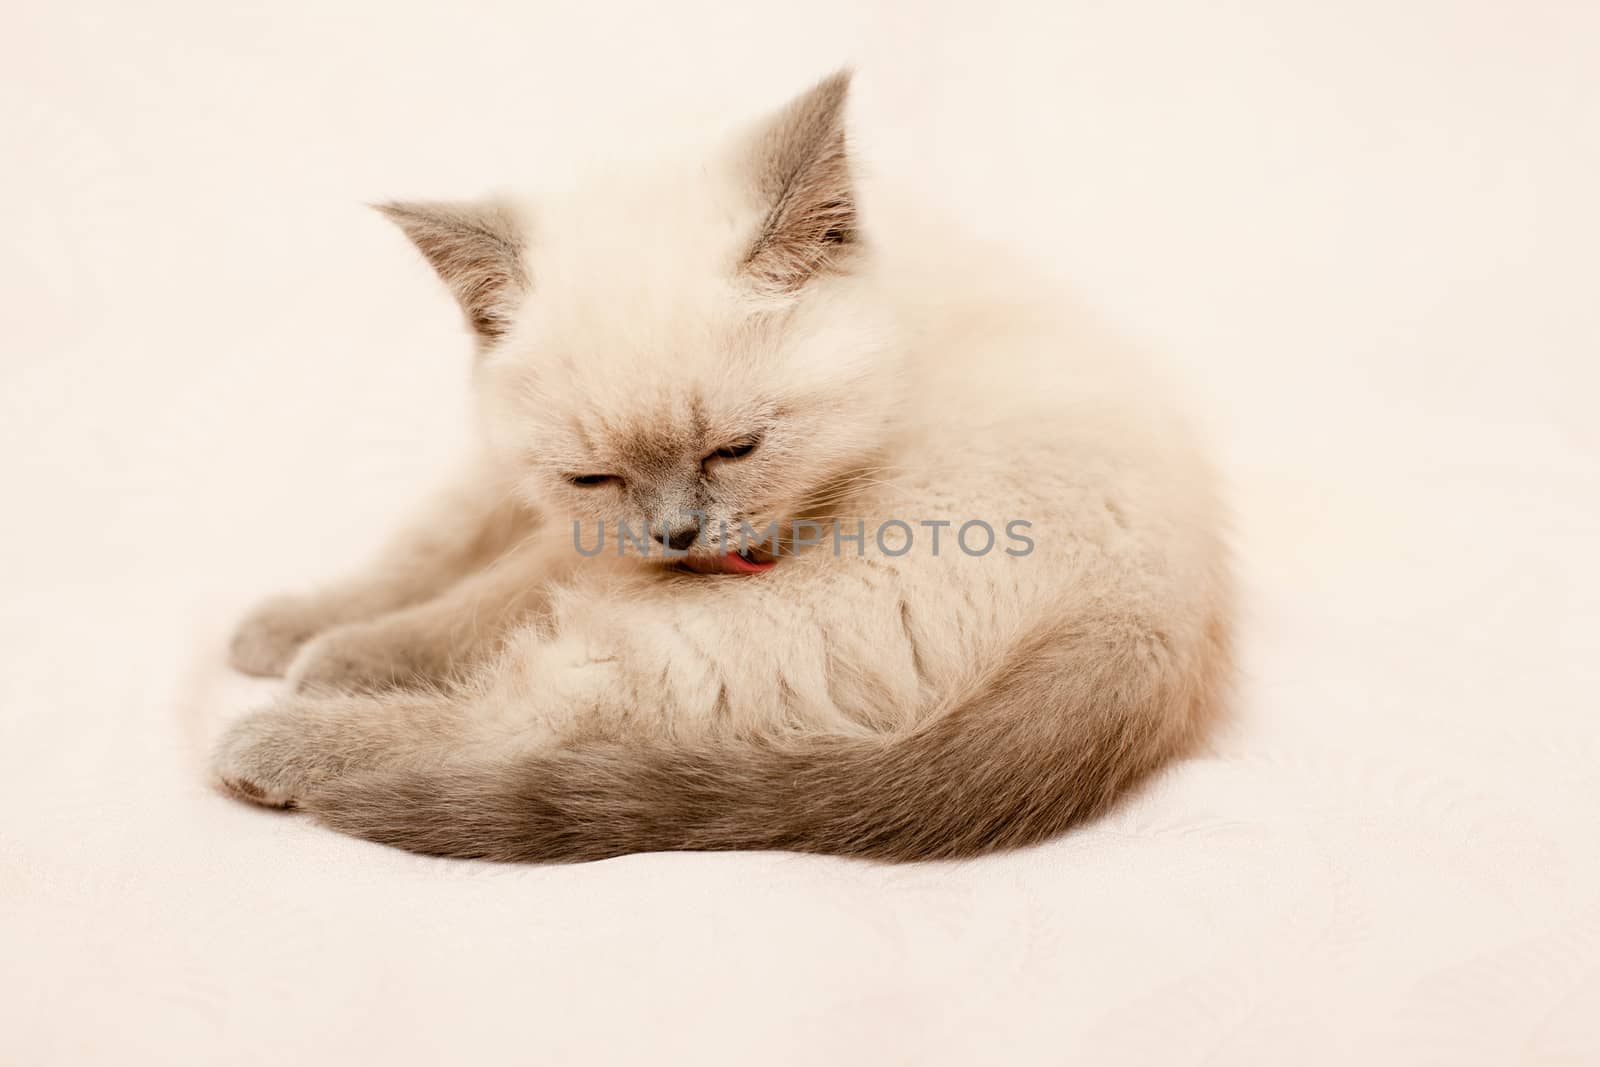 Grey and white kitten on pink background
